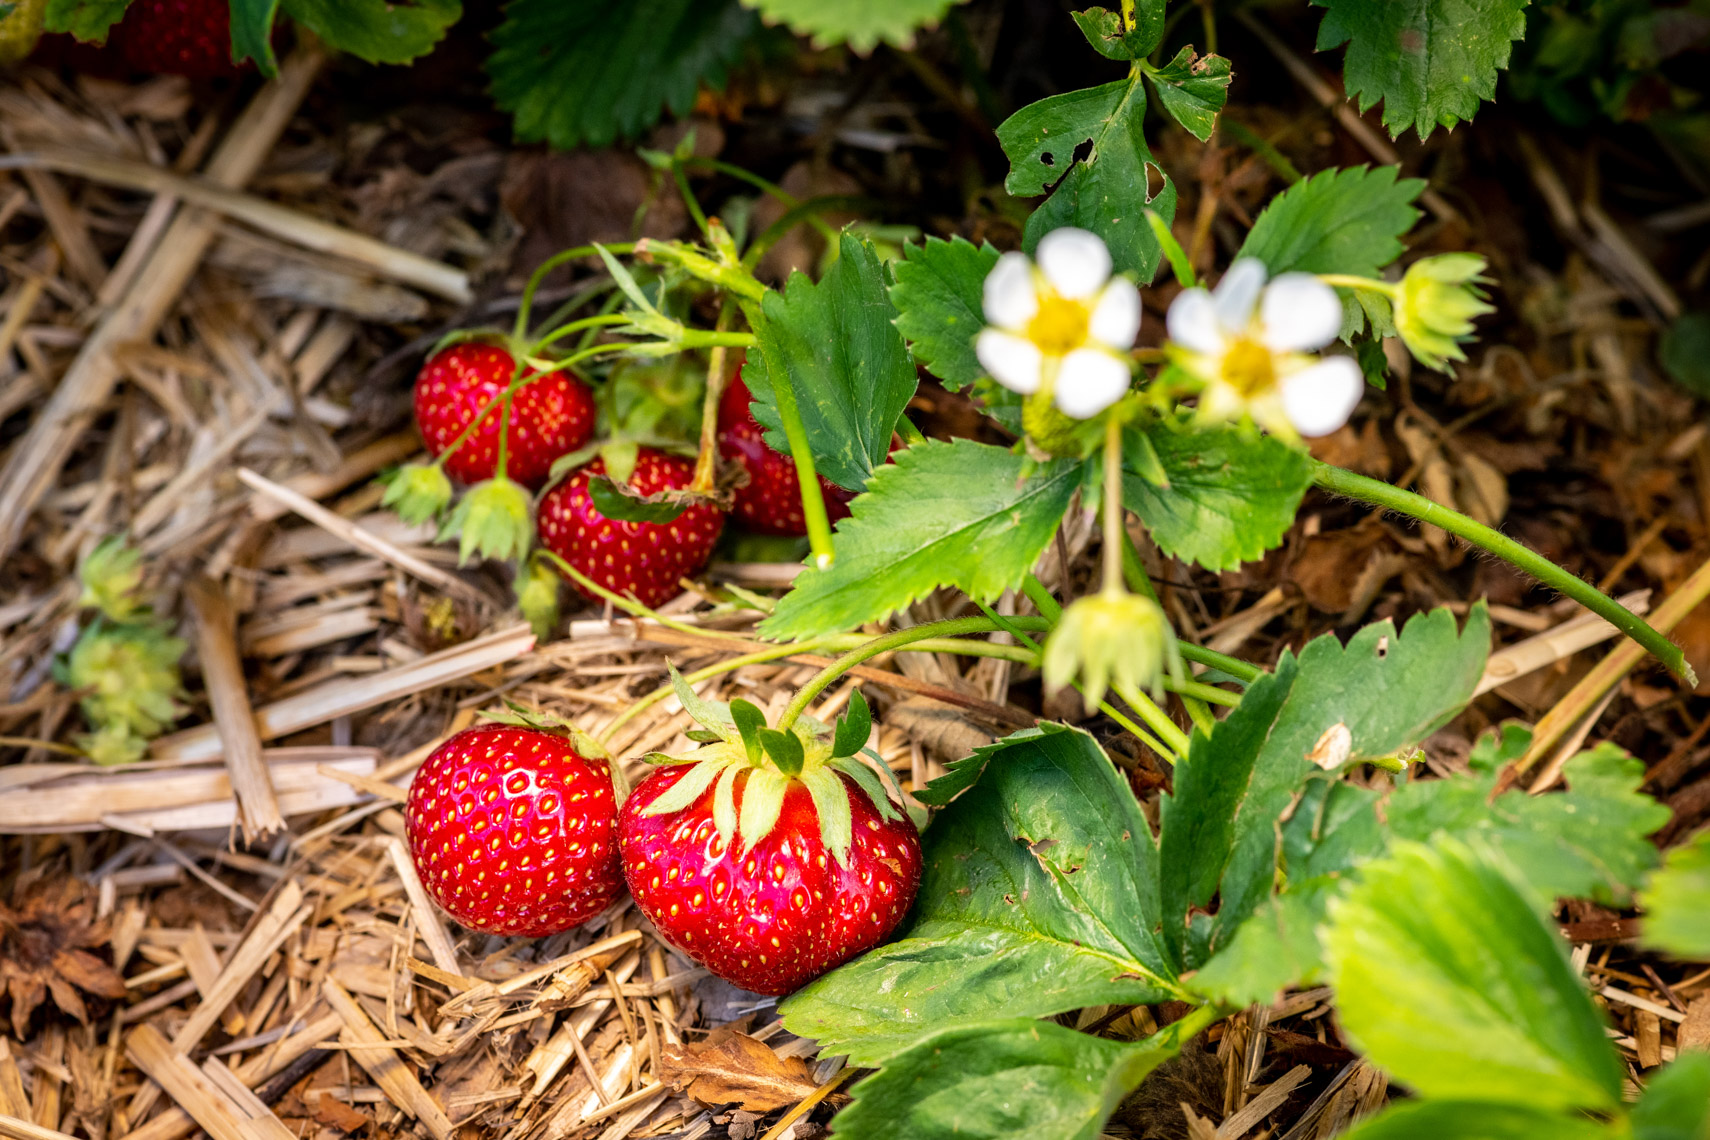 Laura-Chase-de-Formigny-Strawberry-Picking-4